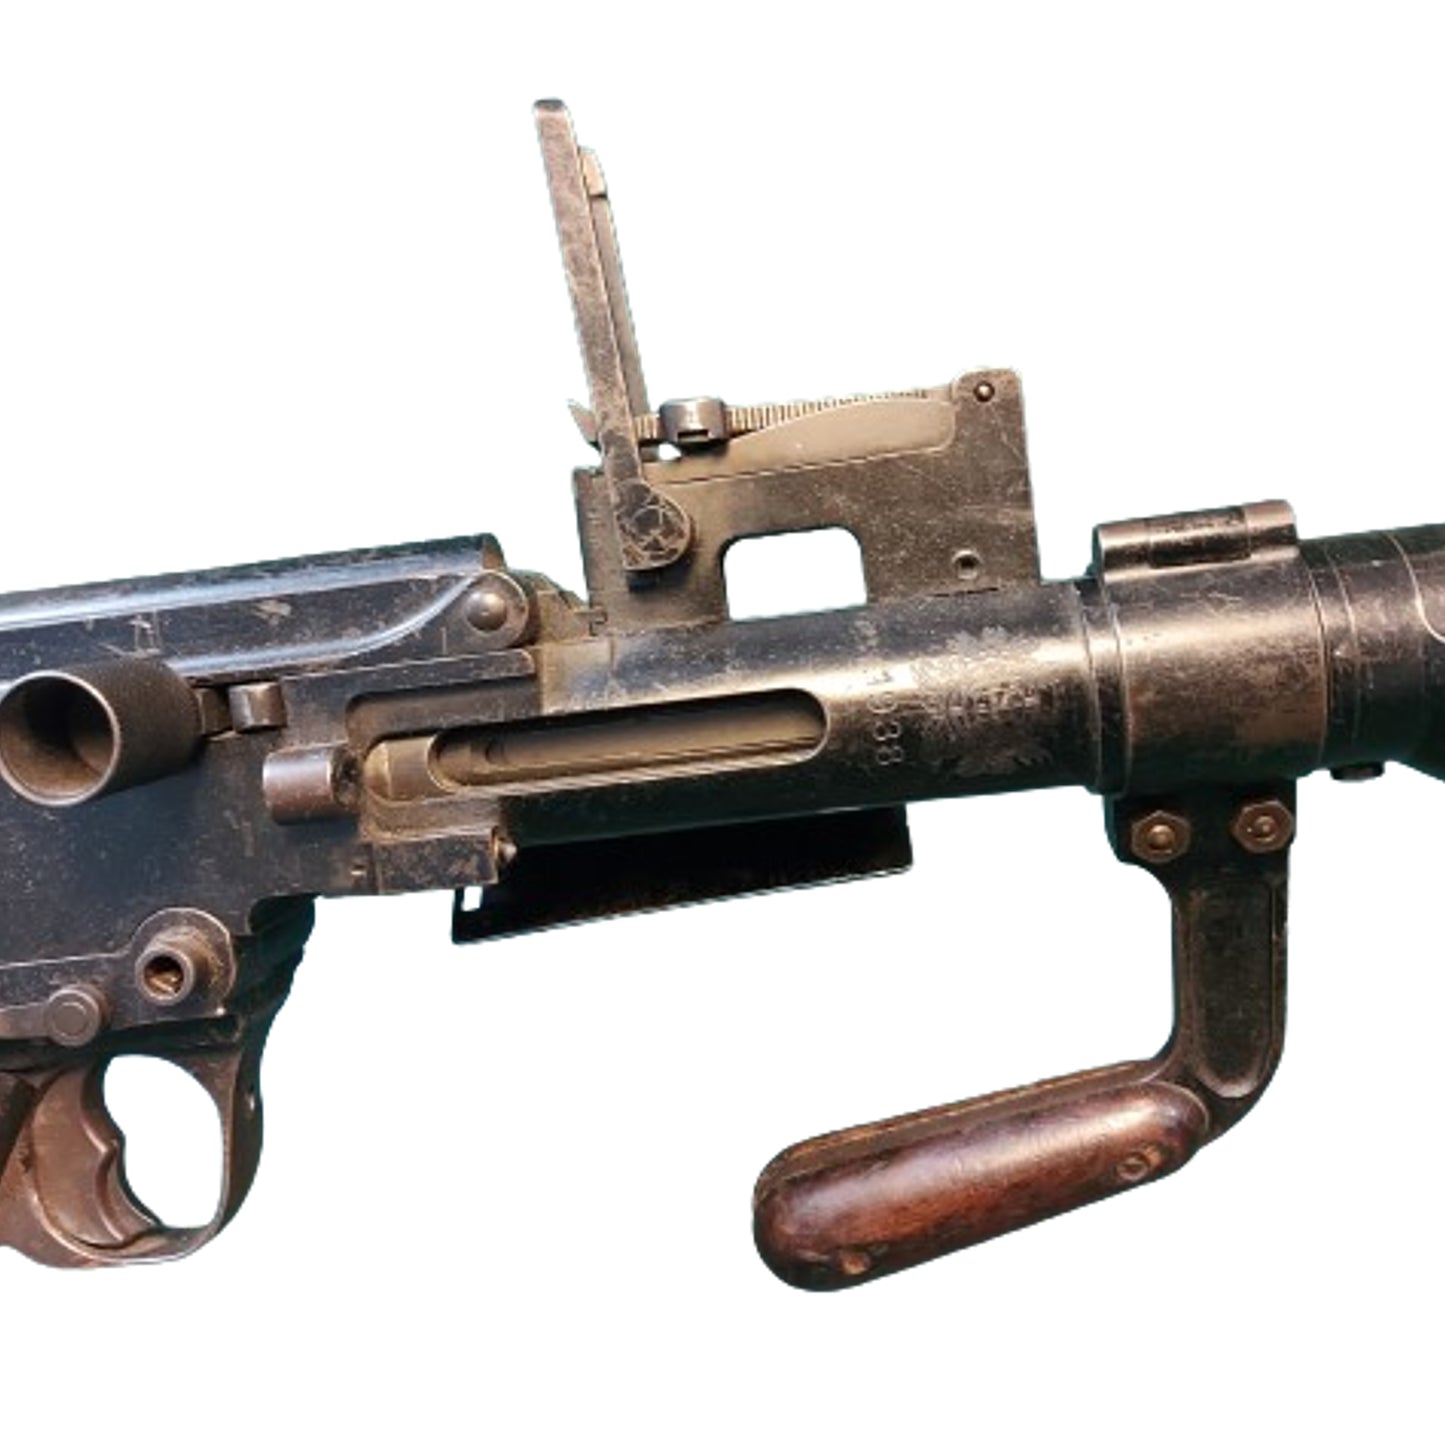 Deactivated WW2 German MG13 M.G. With Indirect Firing Assist Kit